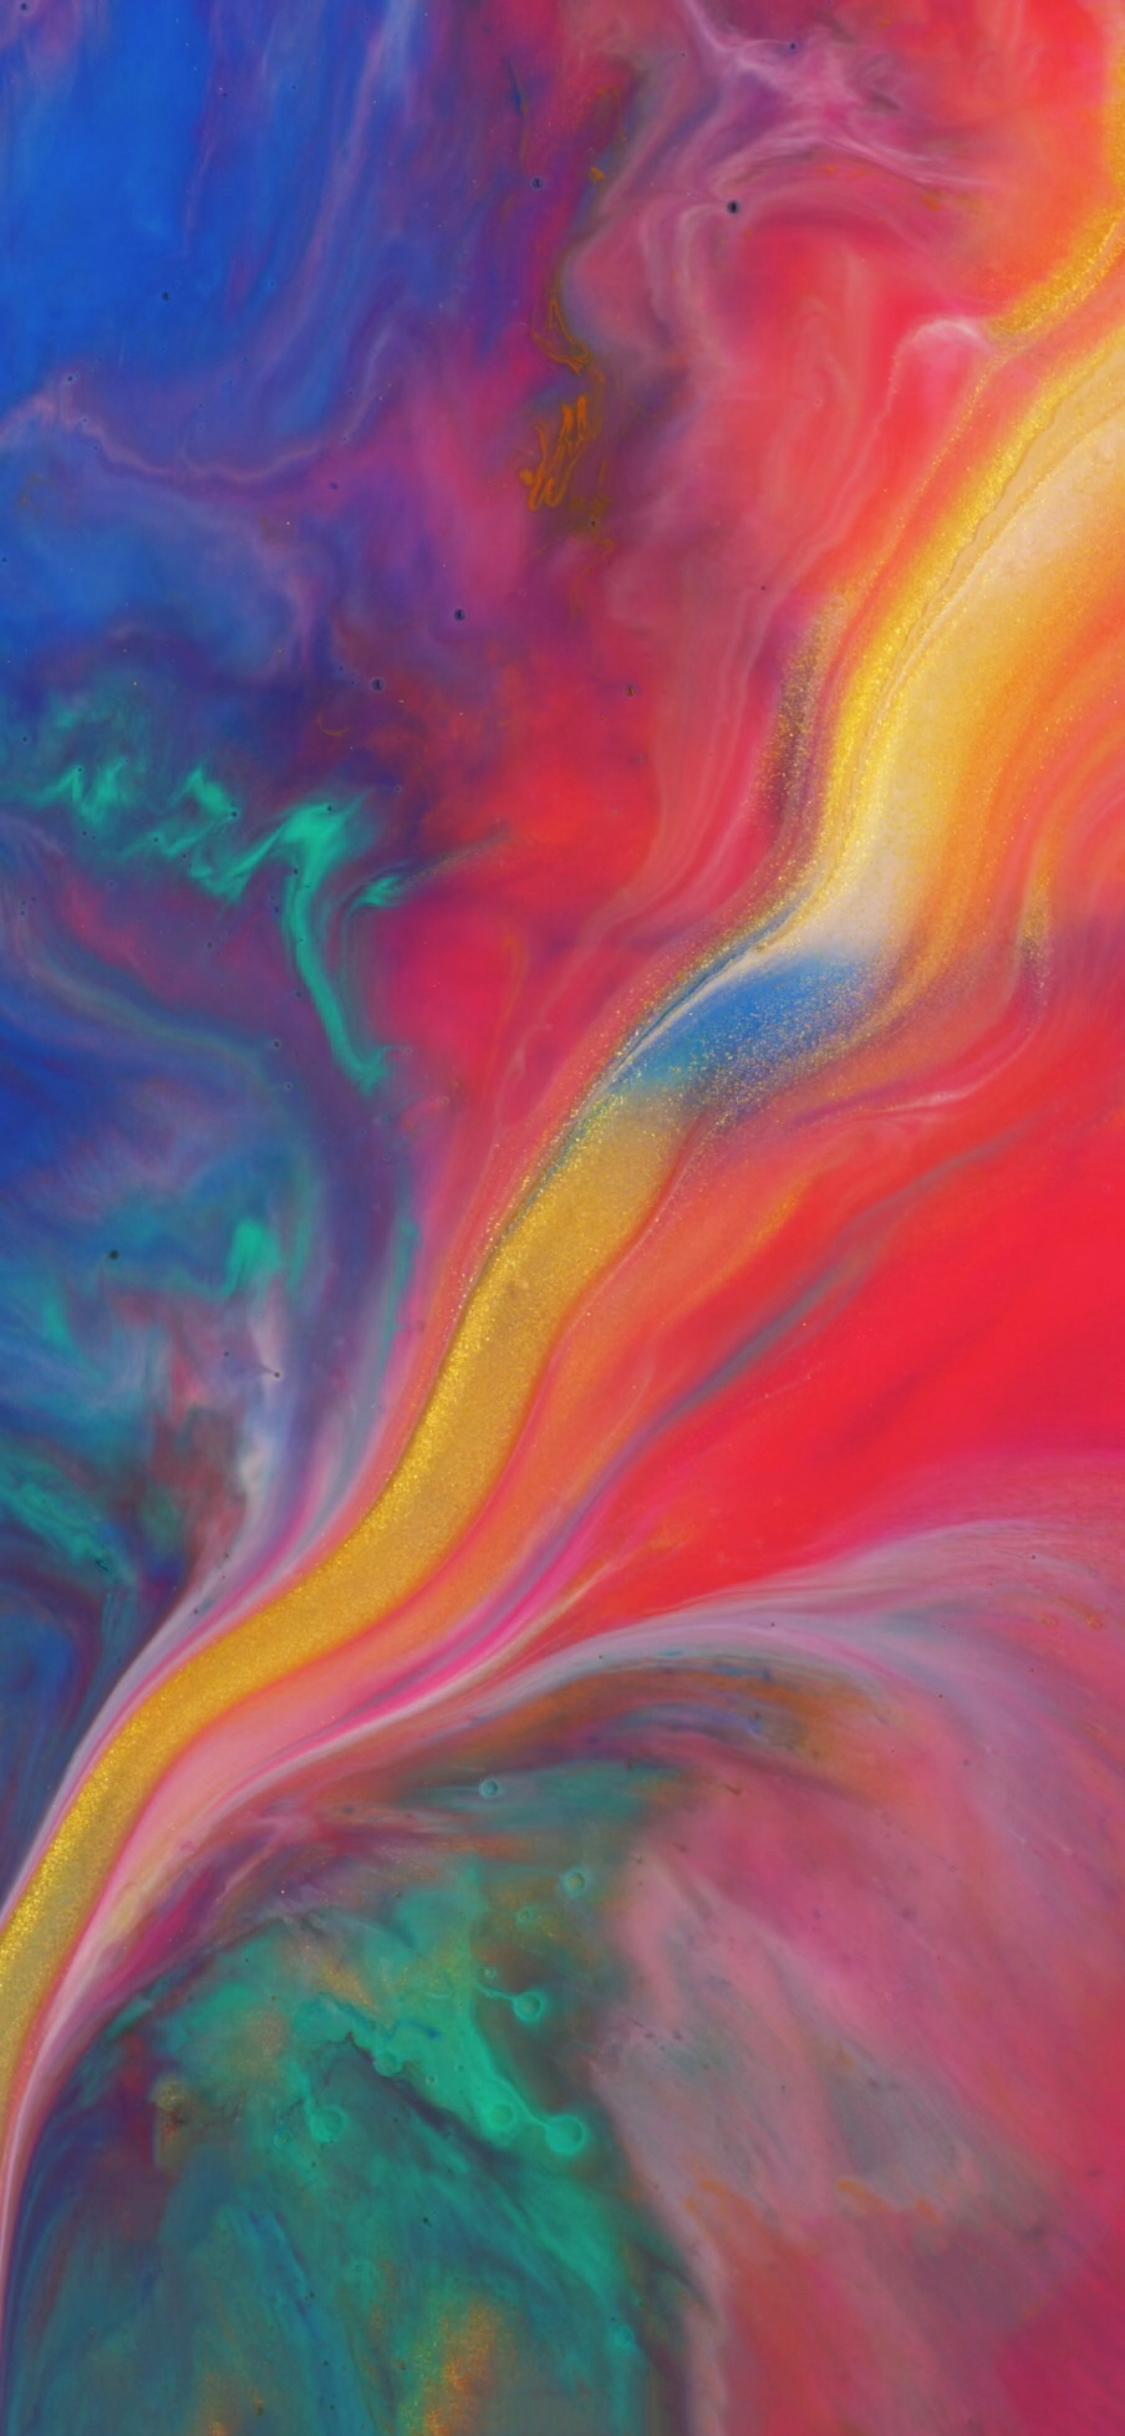 1125 x 2436 · jpeg - iPhone X Official Wallpaper - All Colors Mix - Wallpapers Central